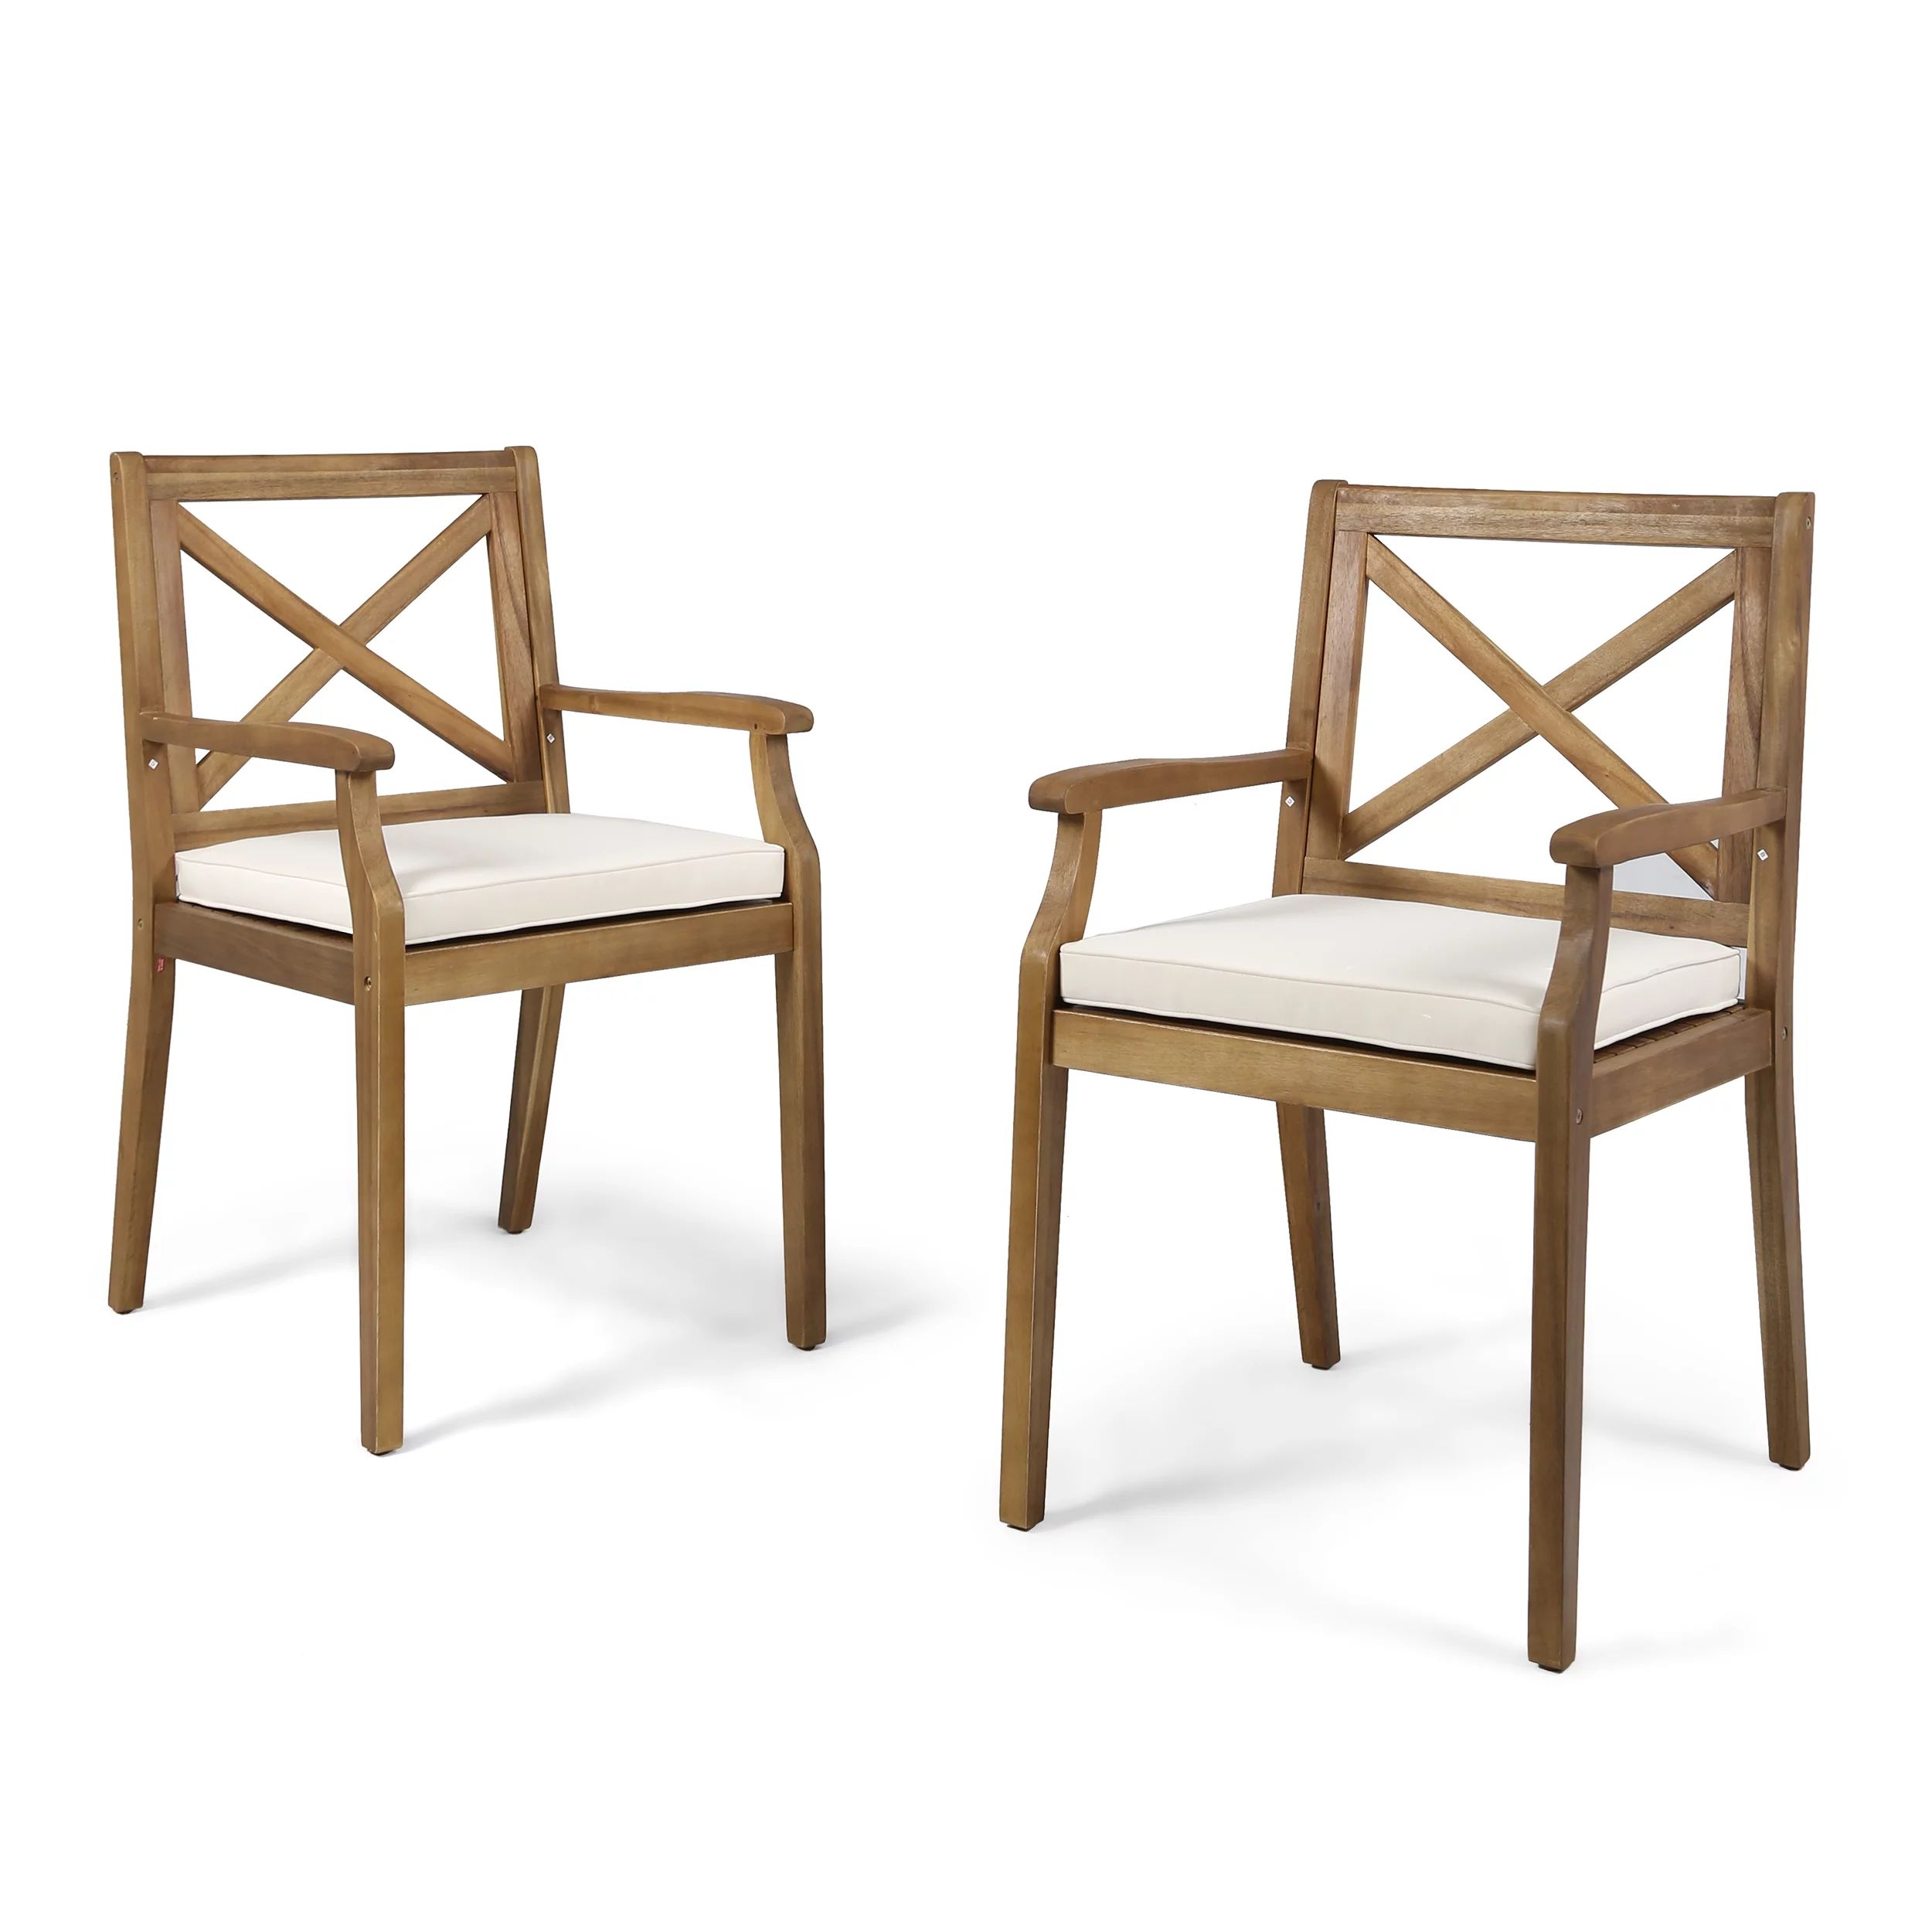 Peter Outdoor Acacia Wood Dining Chair, Set of 2, Teak with Cream Cushions | Walmart (US)